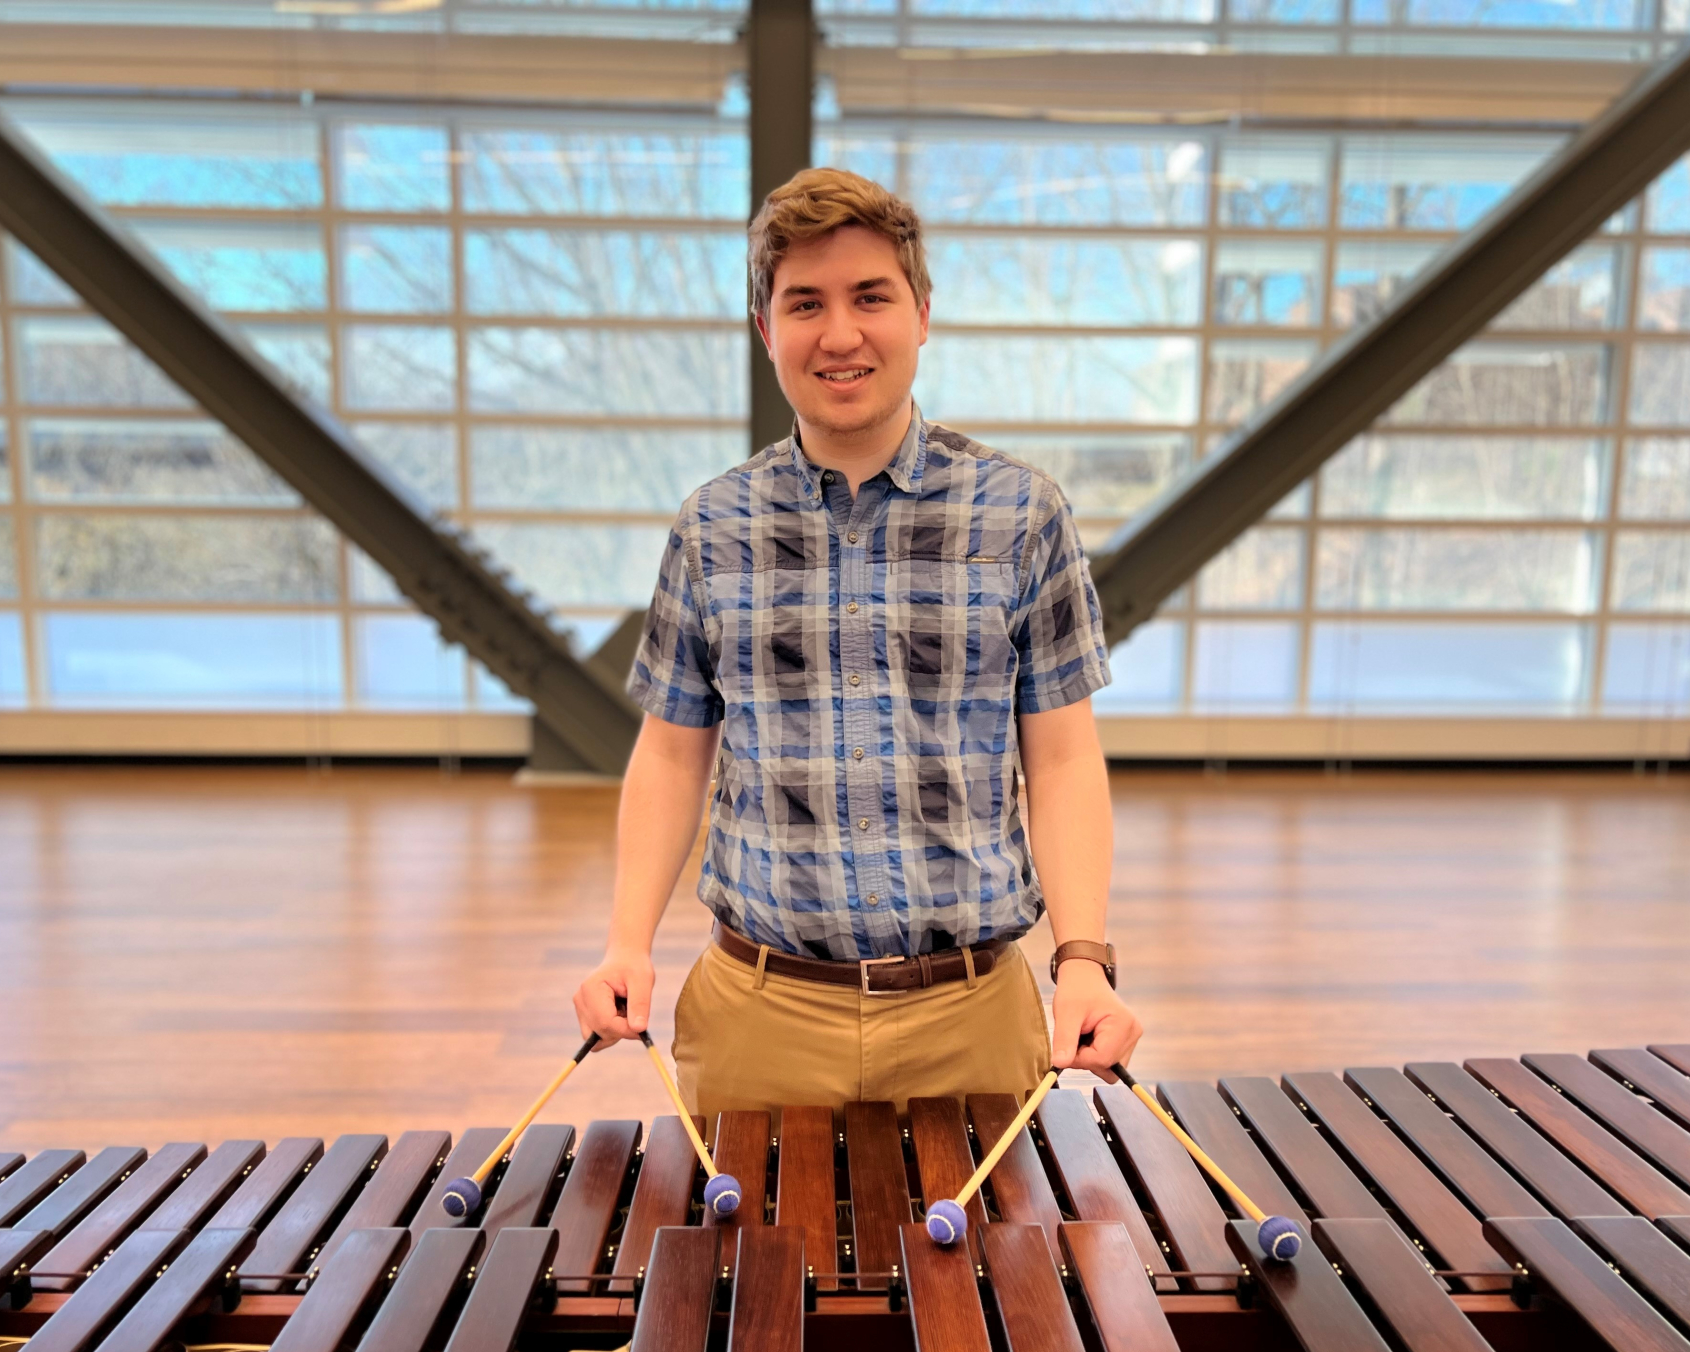 Brandon Phelps is in the Music degree program and an RA in the residence hall. He's pictured playing the marimba in the Academic II building.